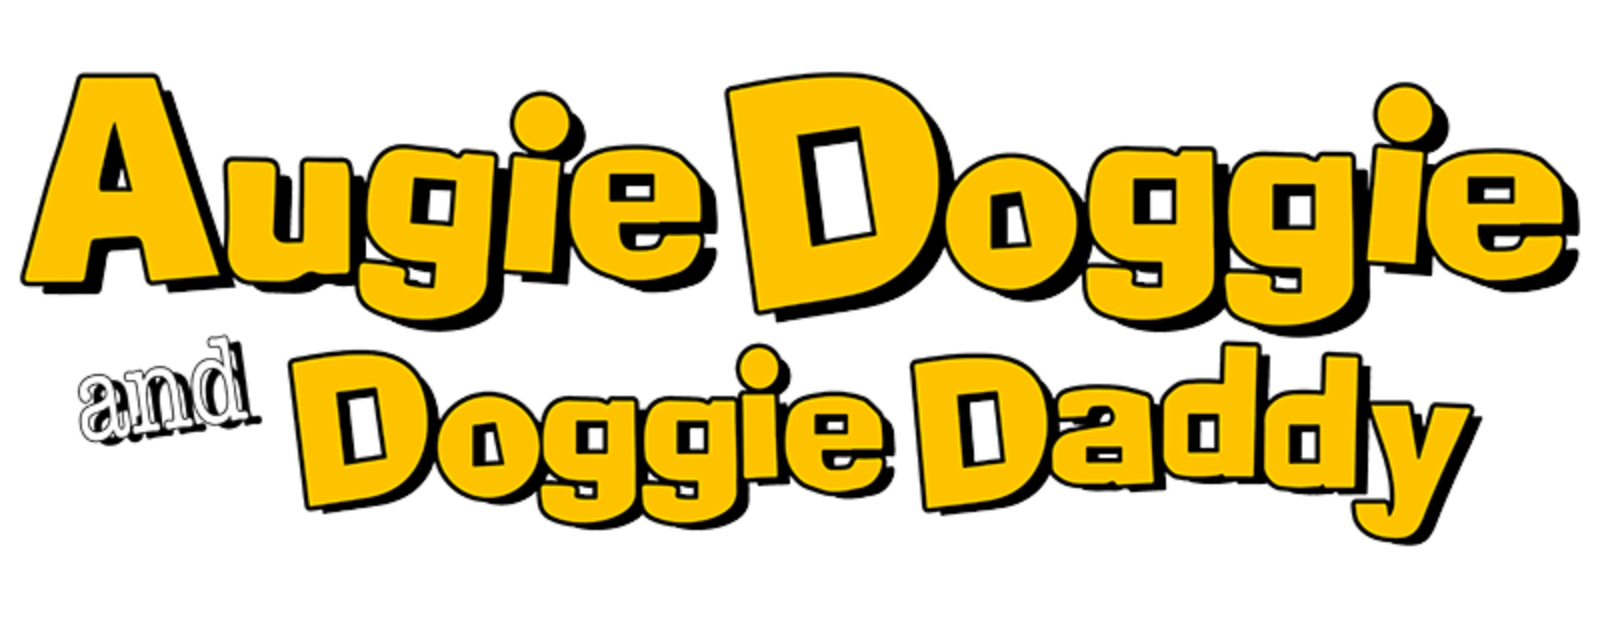 Augie Doggie and Doggie Daddy Complete (2 DVDs Box Set)